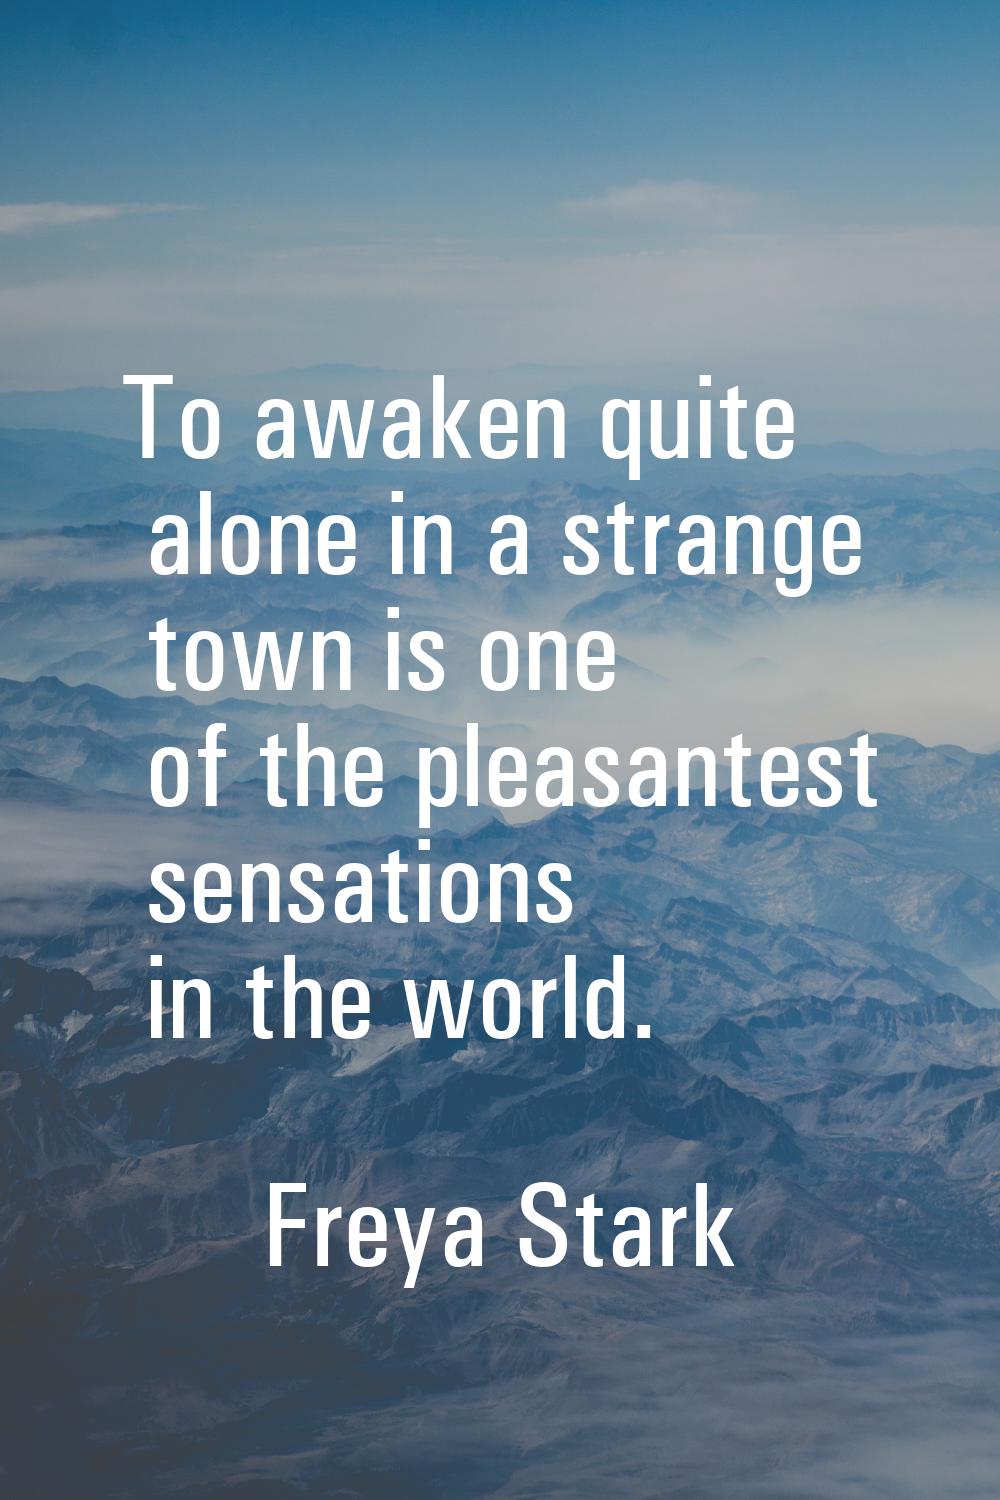 To awaken quite alone in a strange town is one of the pleasantest sensations in the world.